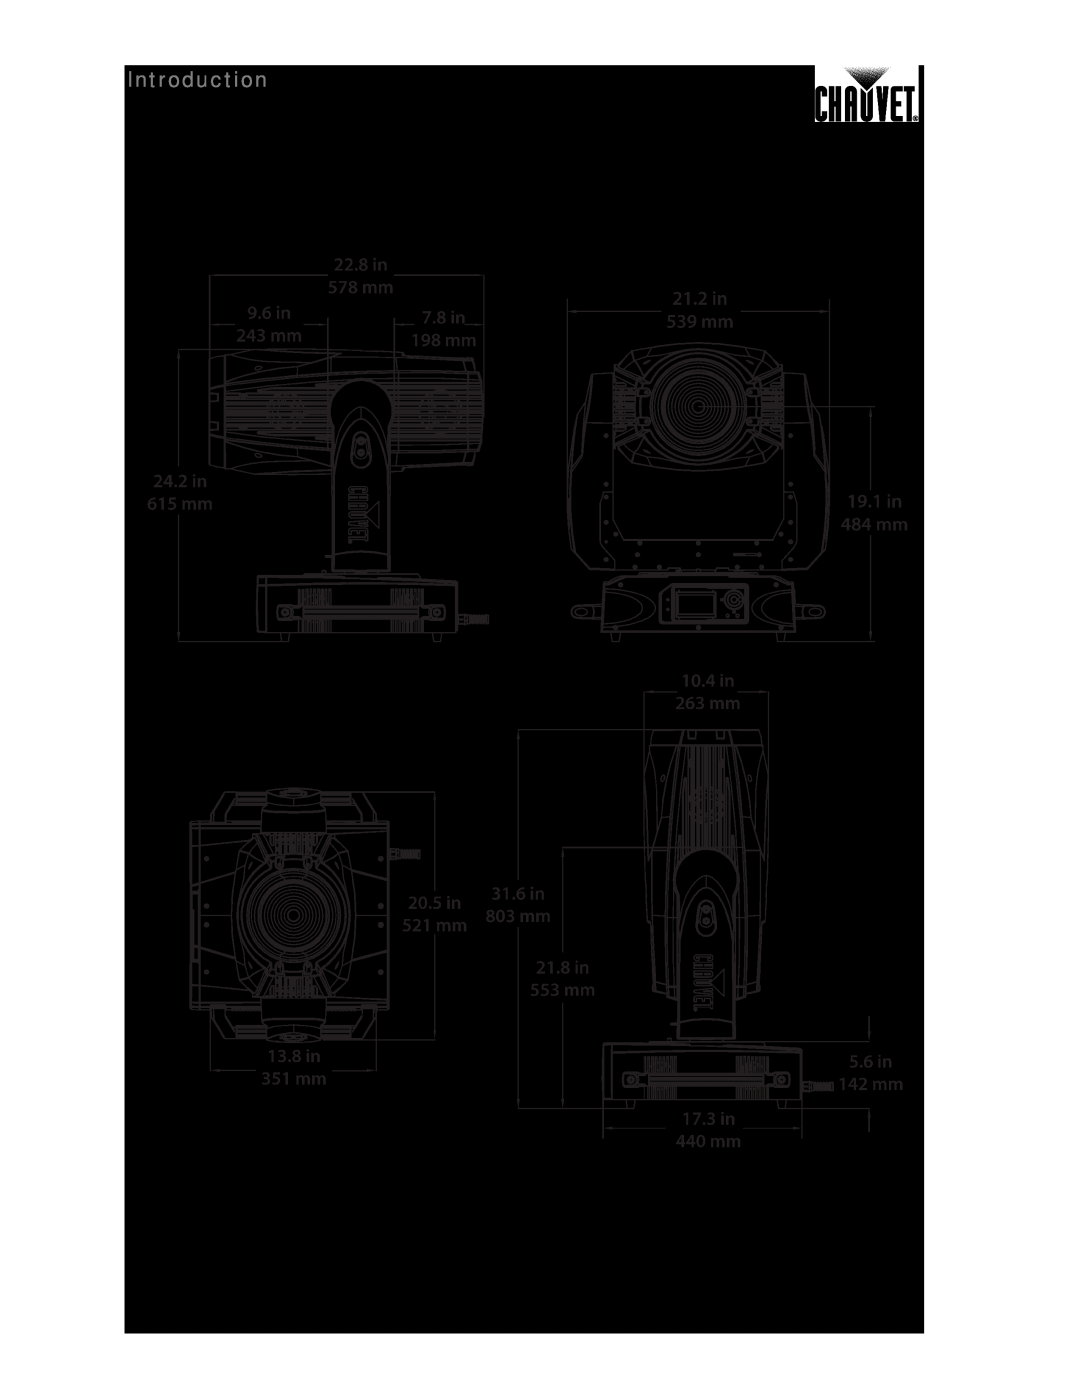 Chauvet 1200E user manual Product Dimensions, Introduction 